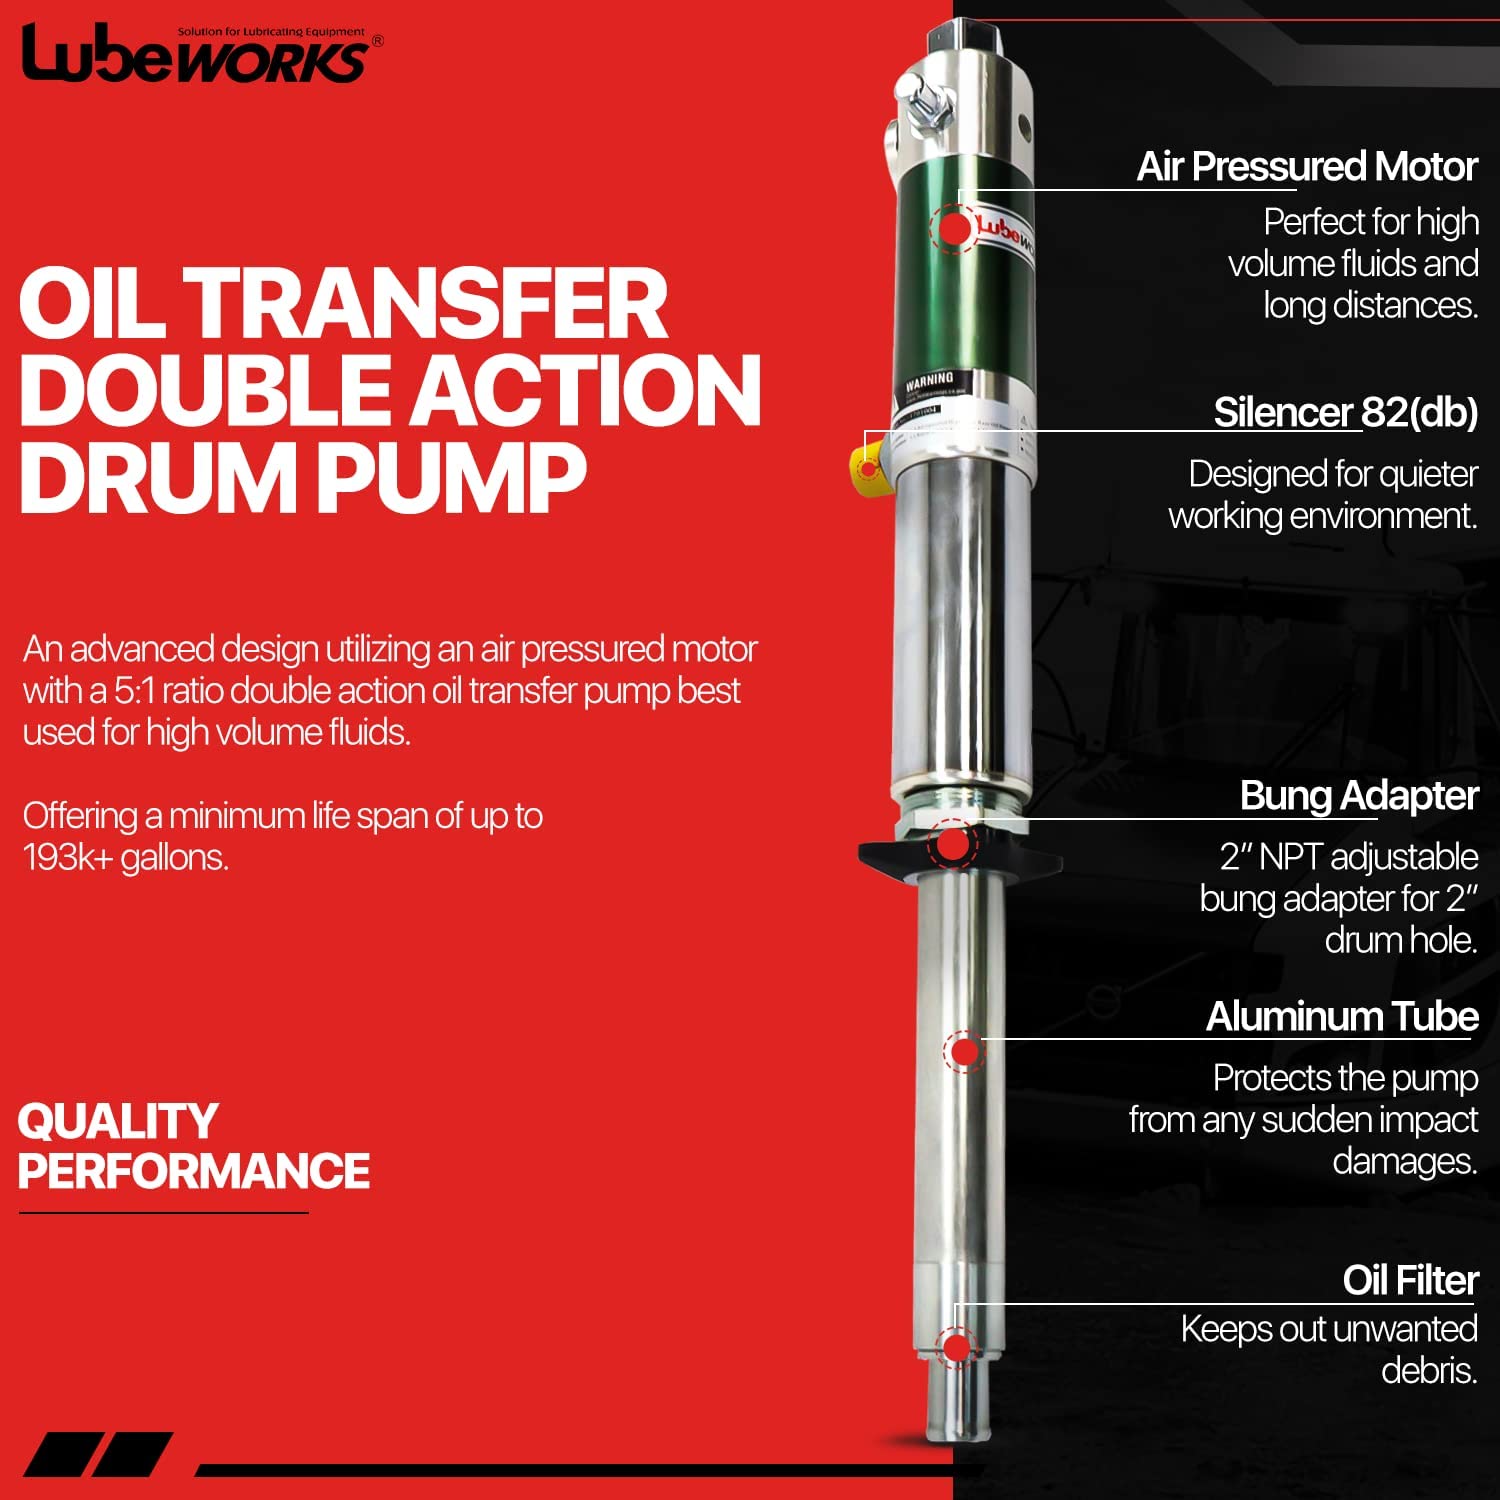 Lubeworks GUL003 5 in 1 Fast Flow Rate 6.6 GPM / 25LPM for SAE240 Oil/Fluids Transfer Drum Pump Double Action New